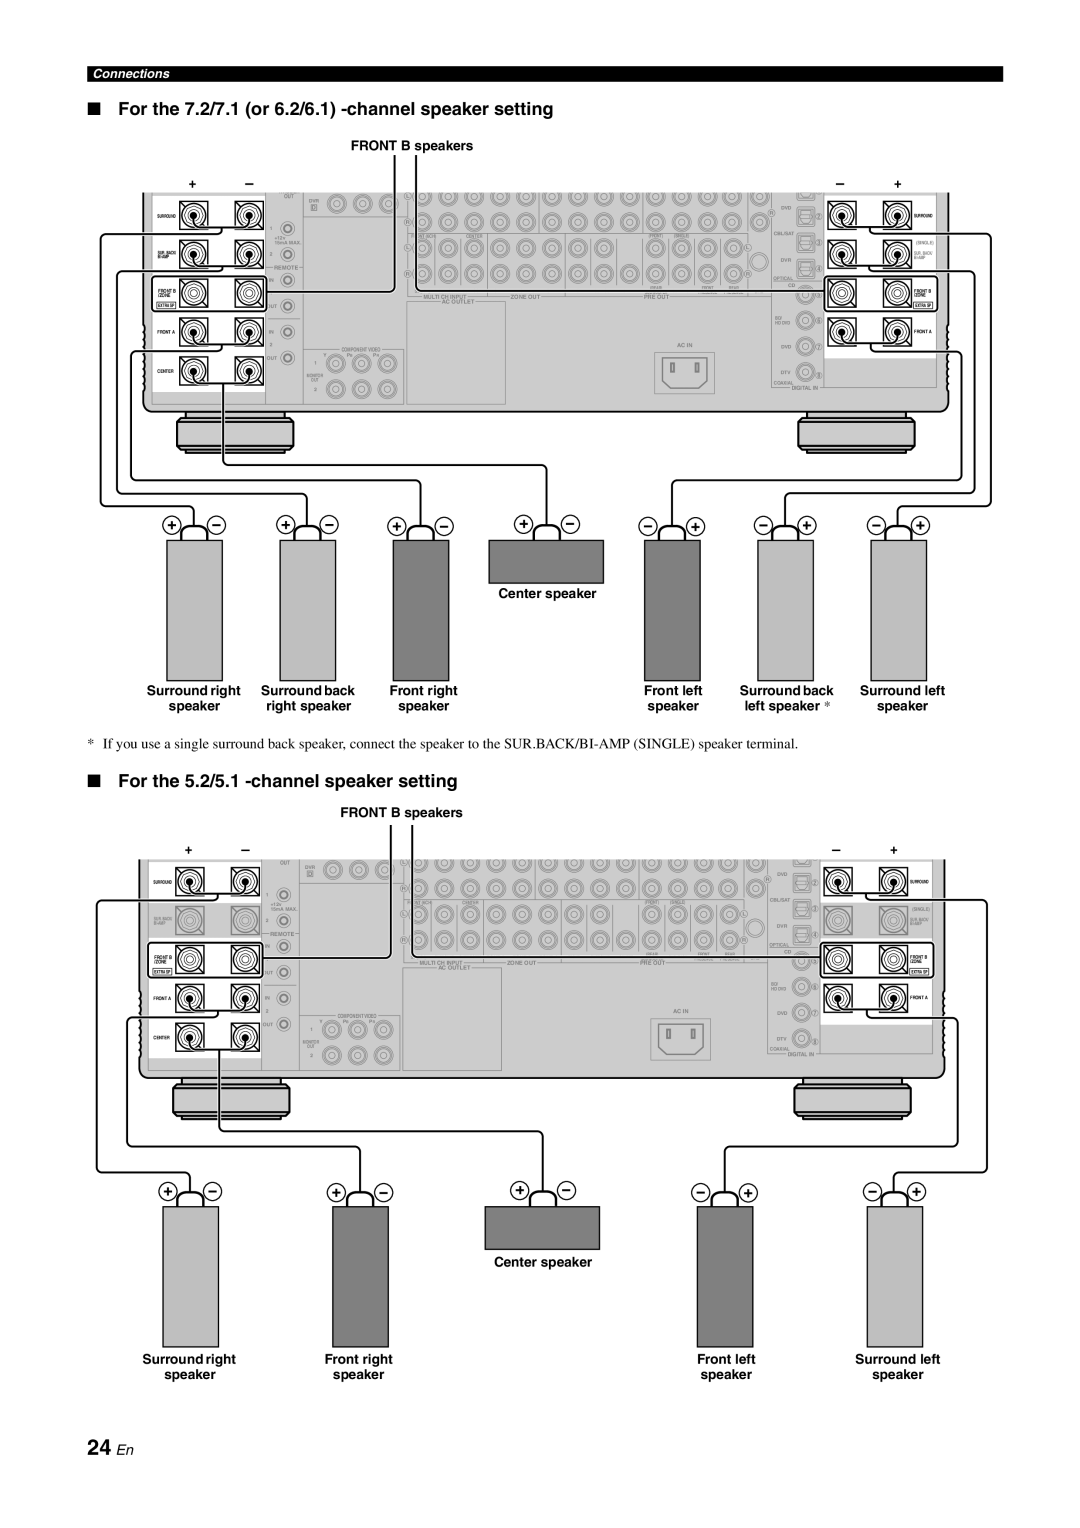 Yamaha DSP-Z11 owner manual 24 En, For the 5.2/5.1 -channelspeaker setting, FRONT B speakers, Connections 